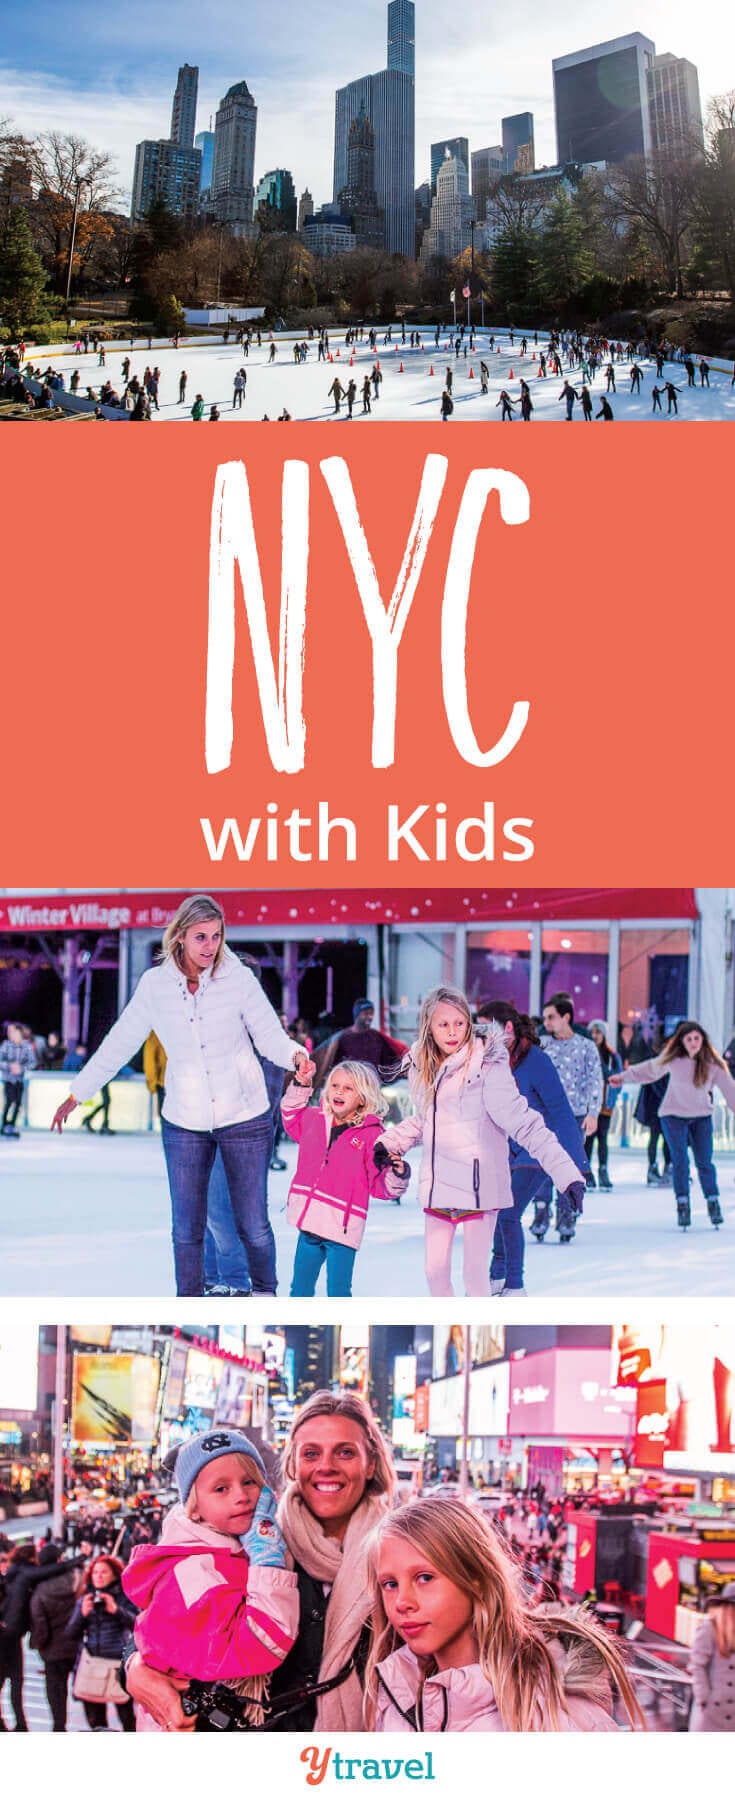 Things to do in NYC with kids - Planning a family trip to New York City? Check out these 15 activities you and your kids will love!